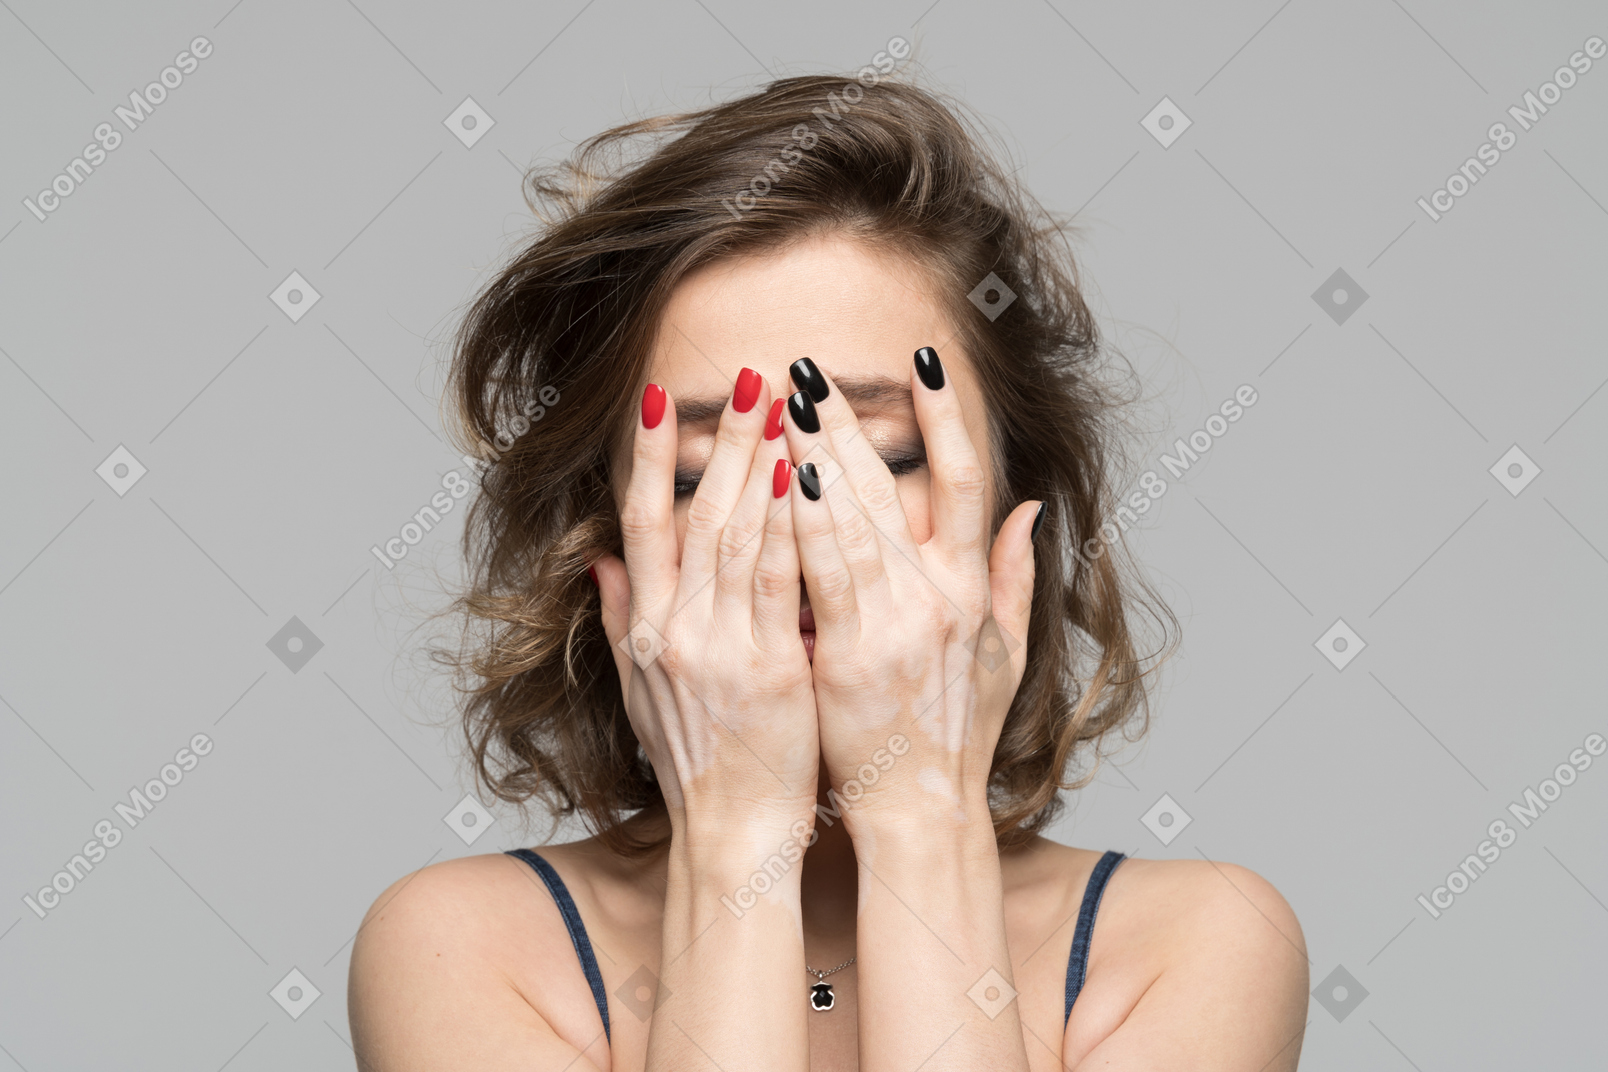 Woman covering face with both palms